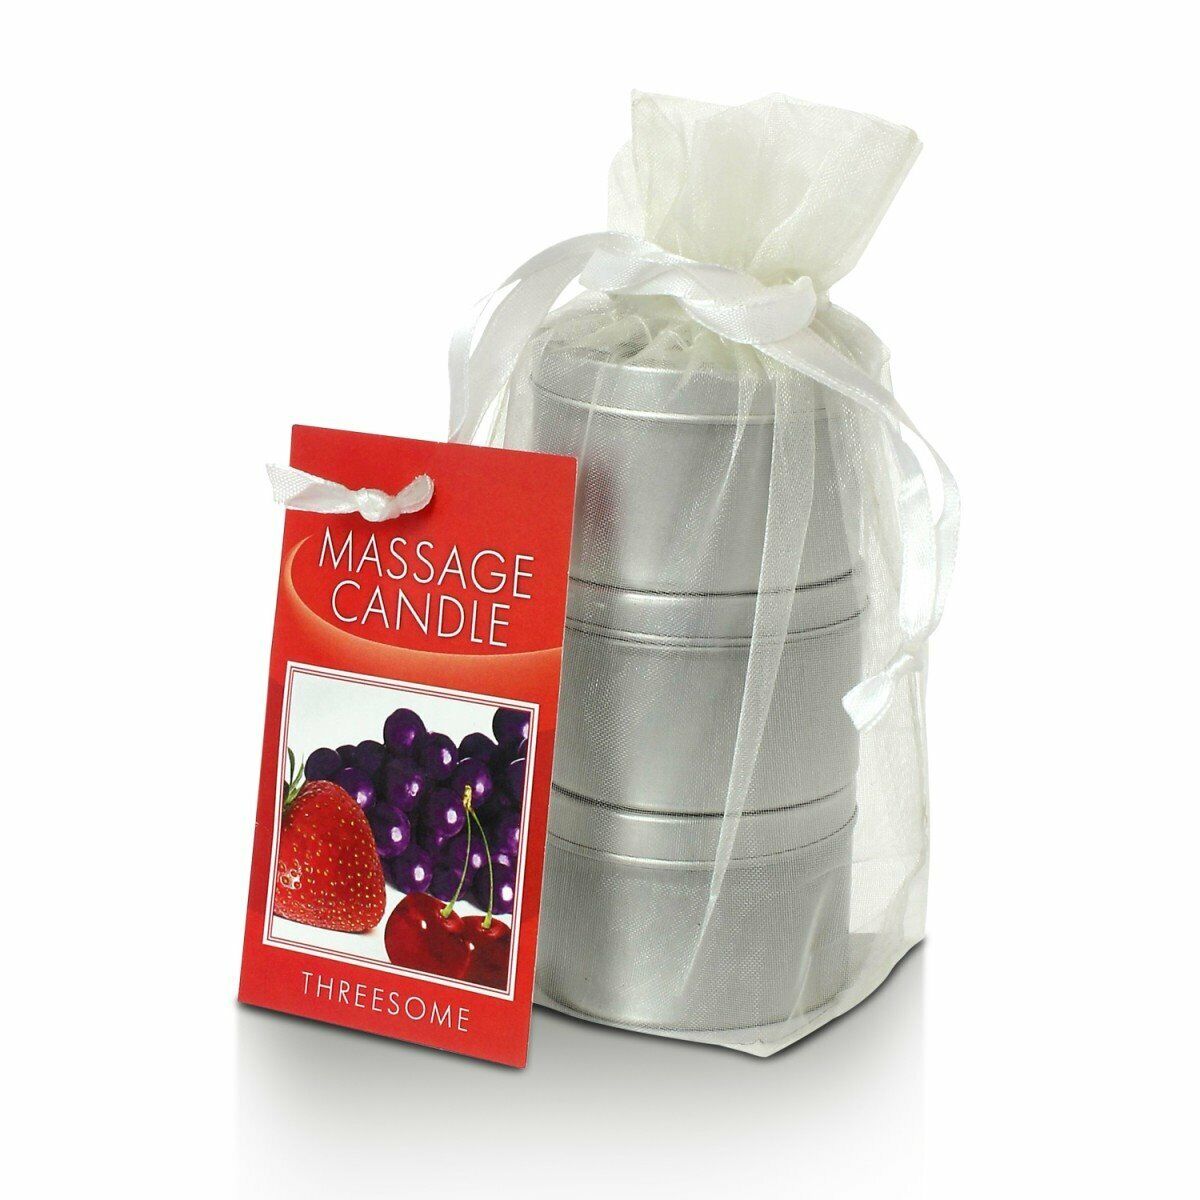 Earthly Body Edible Massage Oil Candle Sampler Cherry Grape Strawberry Flavored